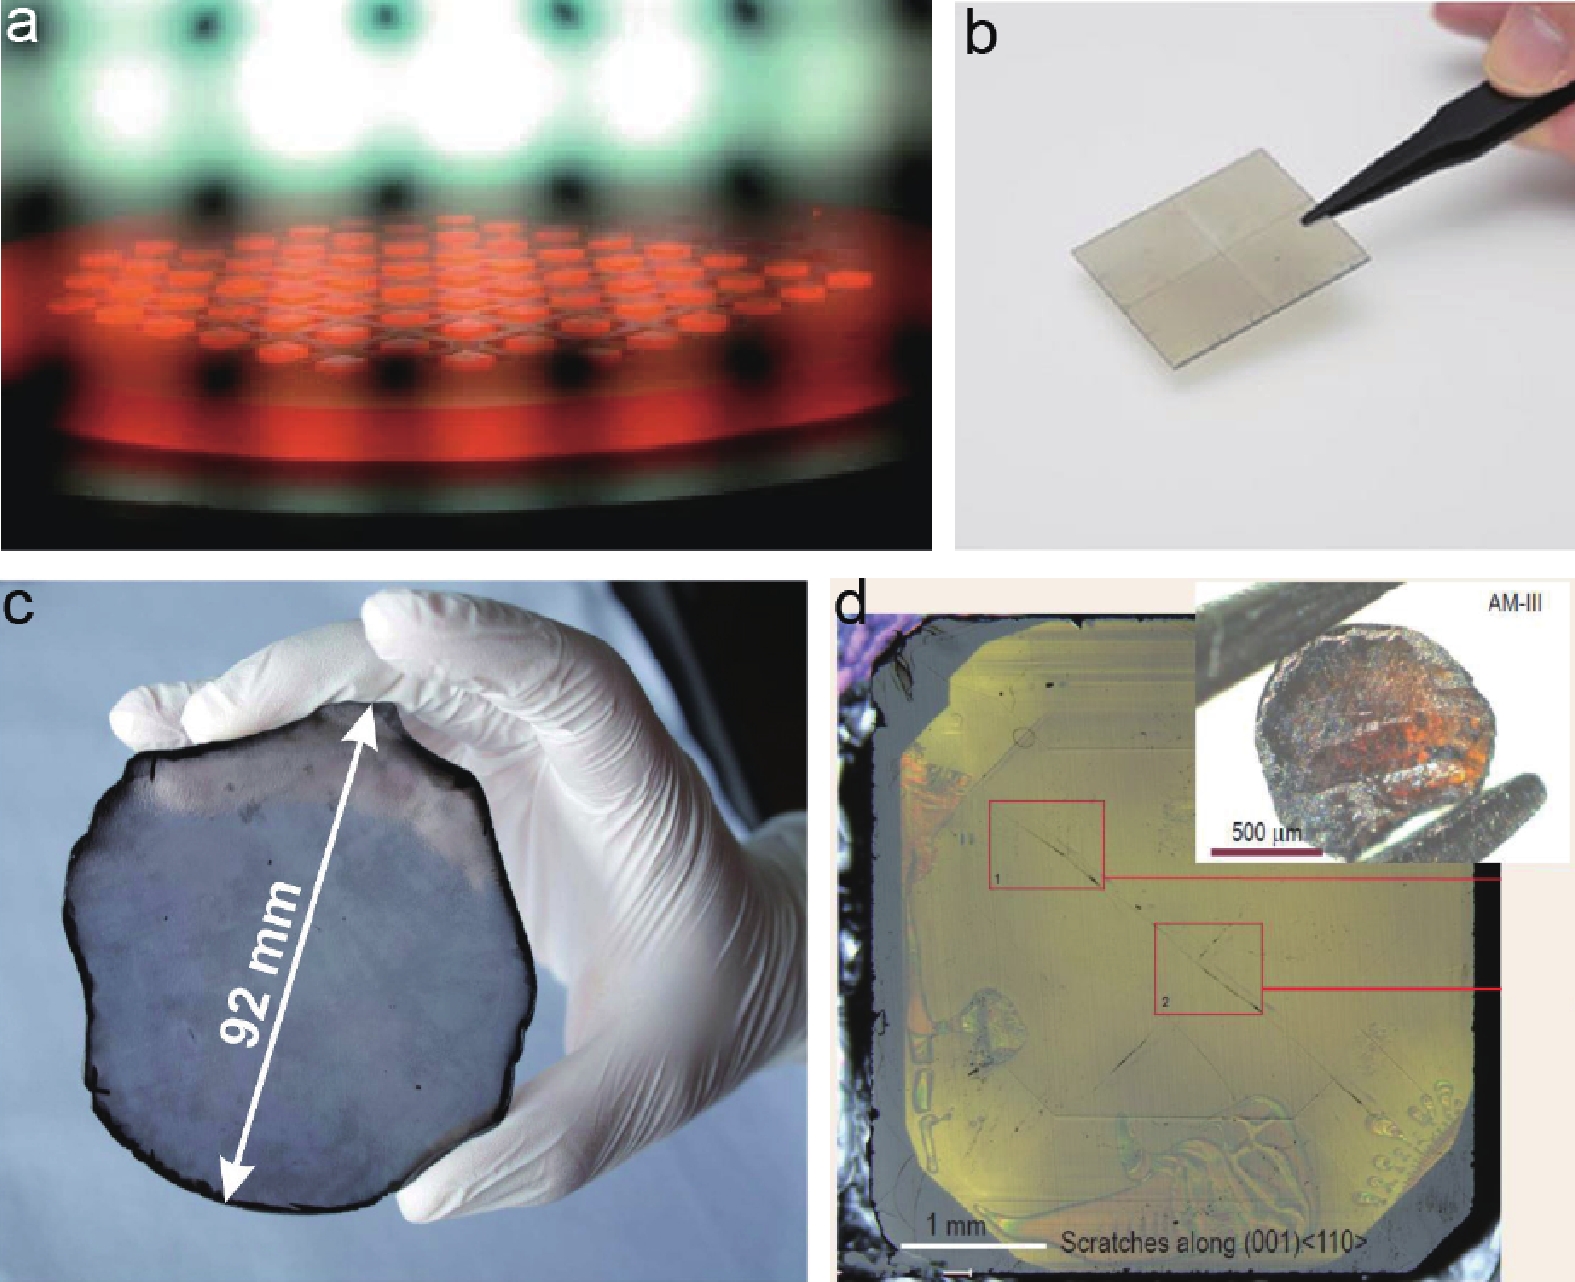 (Color online) Synthetic diamonds. (a) Microwave plasma-assisted CVD growth of SCD over 70 large 3.5 × 3.5 mm2 HPHT seed crystals[11, 106]. (b) A mosaic wafer (40 × 40 mm2) in which CVD growth connects diamond plate fragments horizontally[77]. (c) A 155-carat freestanding pristine SCD with a thickness of 1.6 ± 0.25 mm and diameter of 90 mm fabricated by heteroepitaxy on Ir/YSZ/Si(001) in a microwave plasma CVD[76]. (d) An amorphous carbon material AM-III showing the intrinsic semiconducting nature with a bandgap of 1.5–2.2 eV[104].